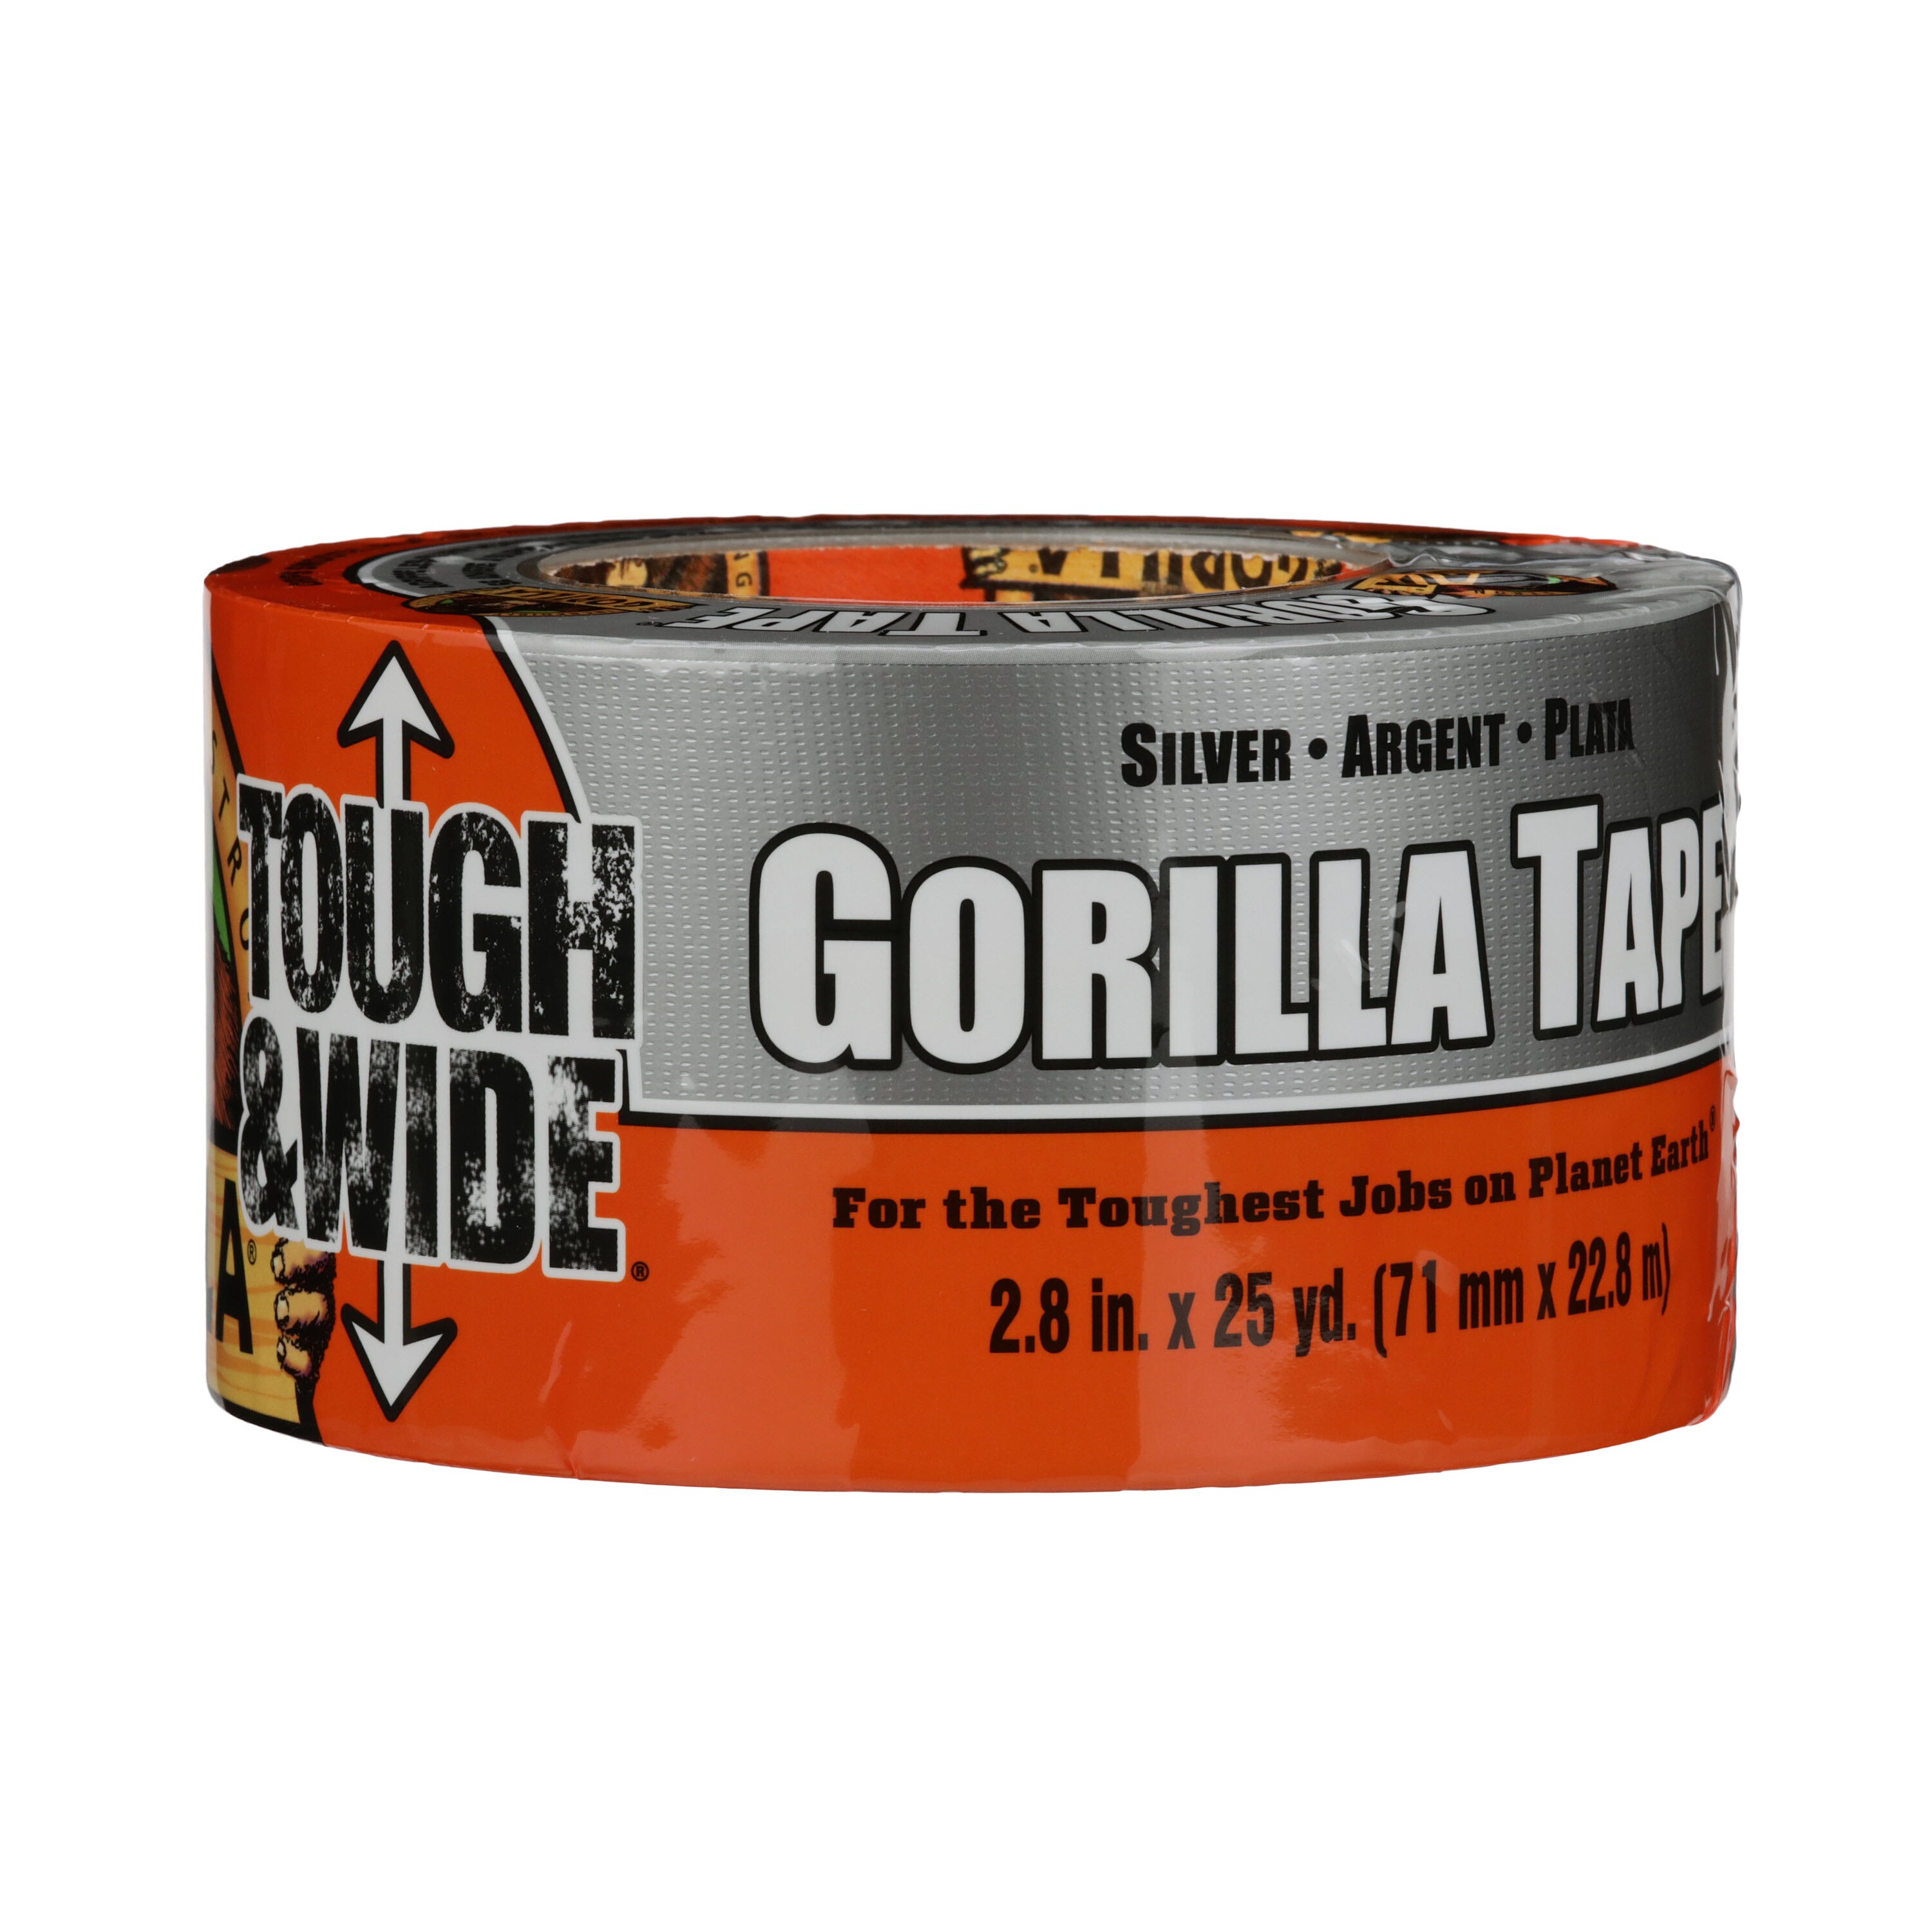 Double-Thick Adhesive Reinforced Backing All Weather Resistant Shell 2.88 in x 25 yd 105680 Silver Duct Tape Pack of 1 Gorilla Tough & Wide Utility Tape